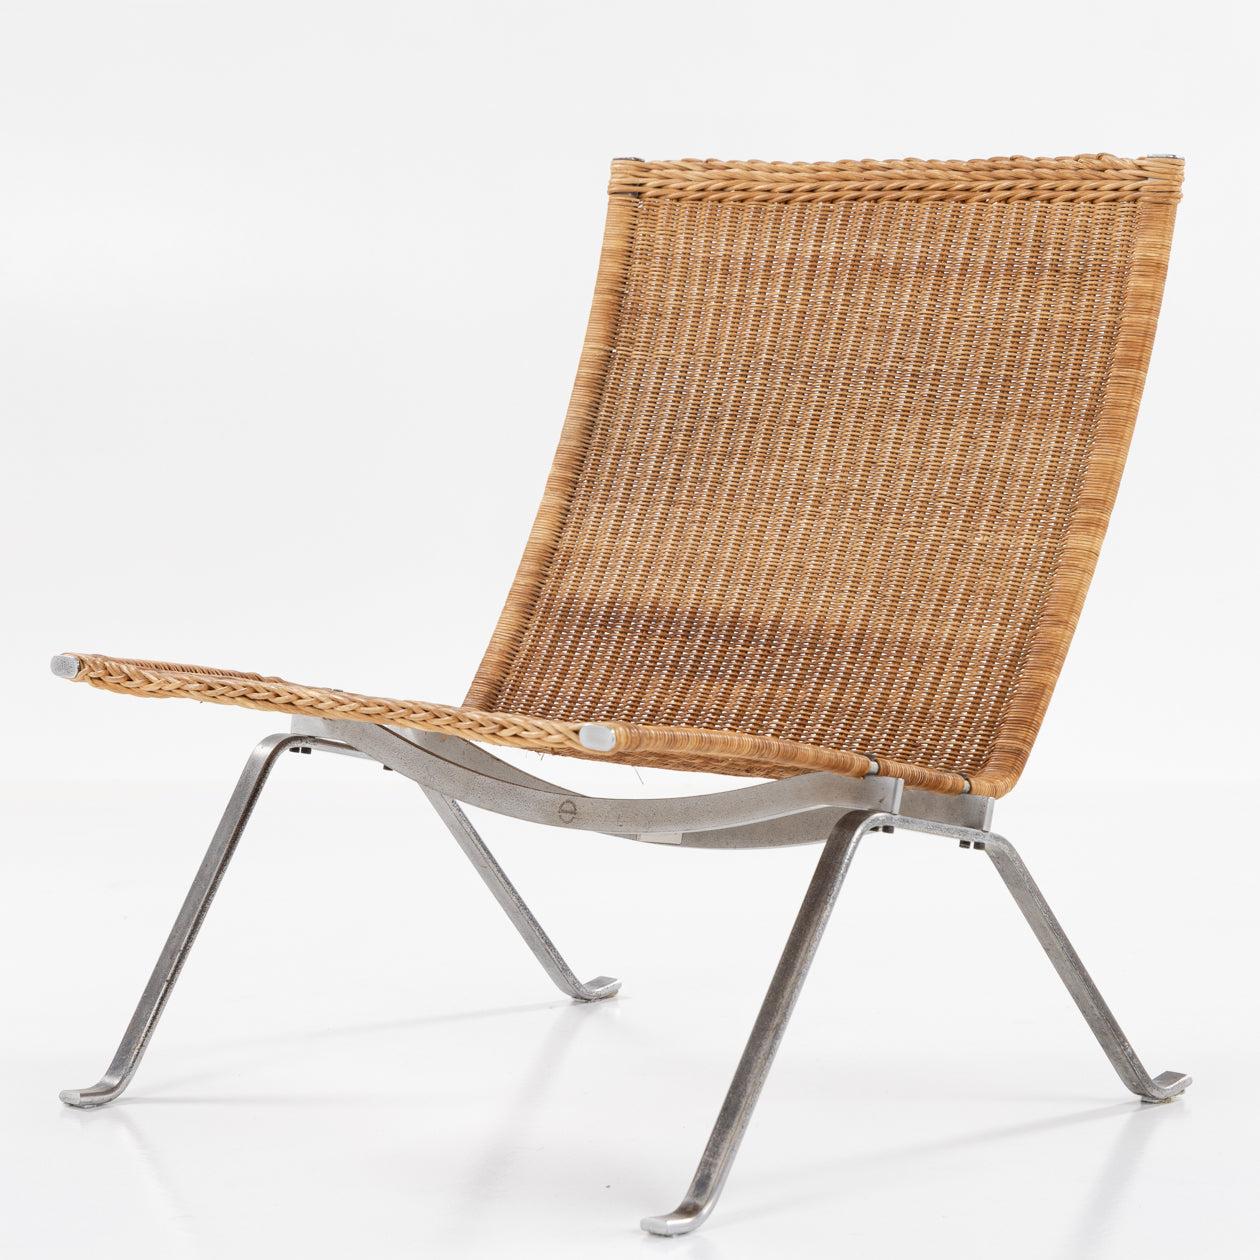 PK 22 - Armchair in patinated woven cane. Labelled from manufacturer. Fritz Hansen.